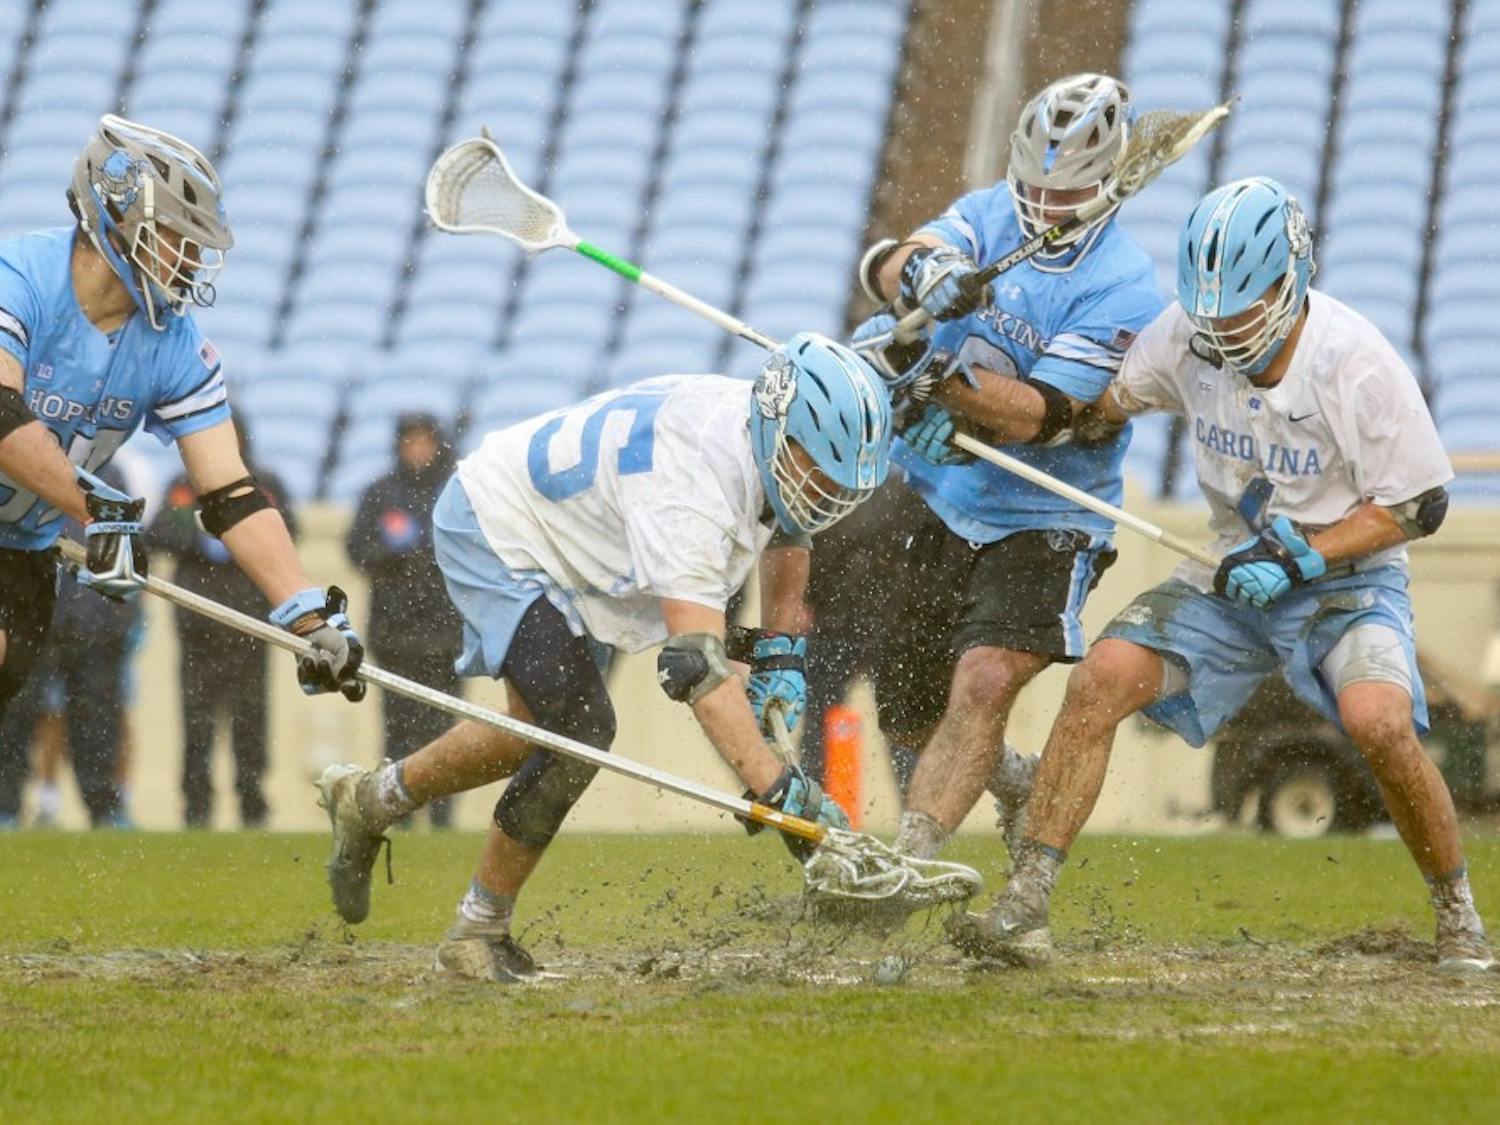 Midfielder Zachary Tucci (35) fights for the ball following a face-off during the game against Johns Hopkins on Saturday, Feb. 24, 2019. Johns Hopkins defeated the Tar Heels 11-10.